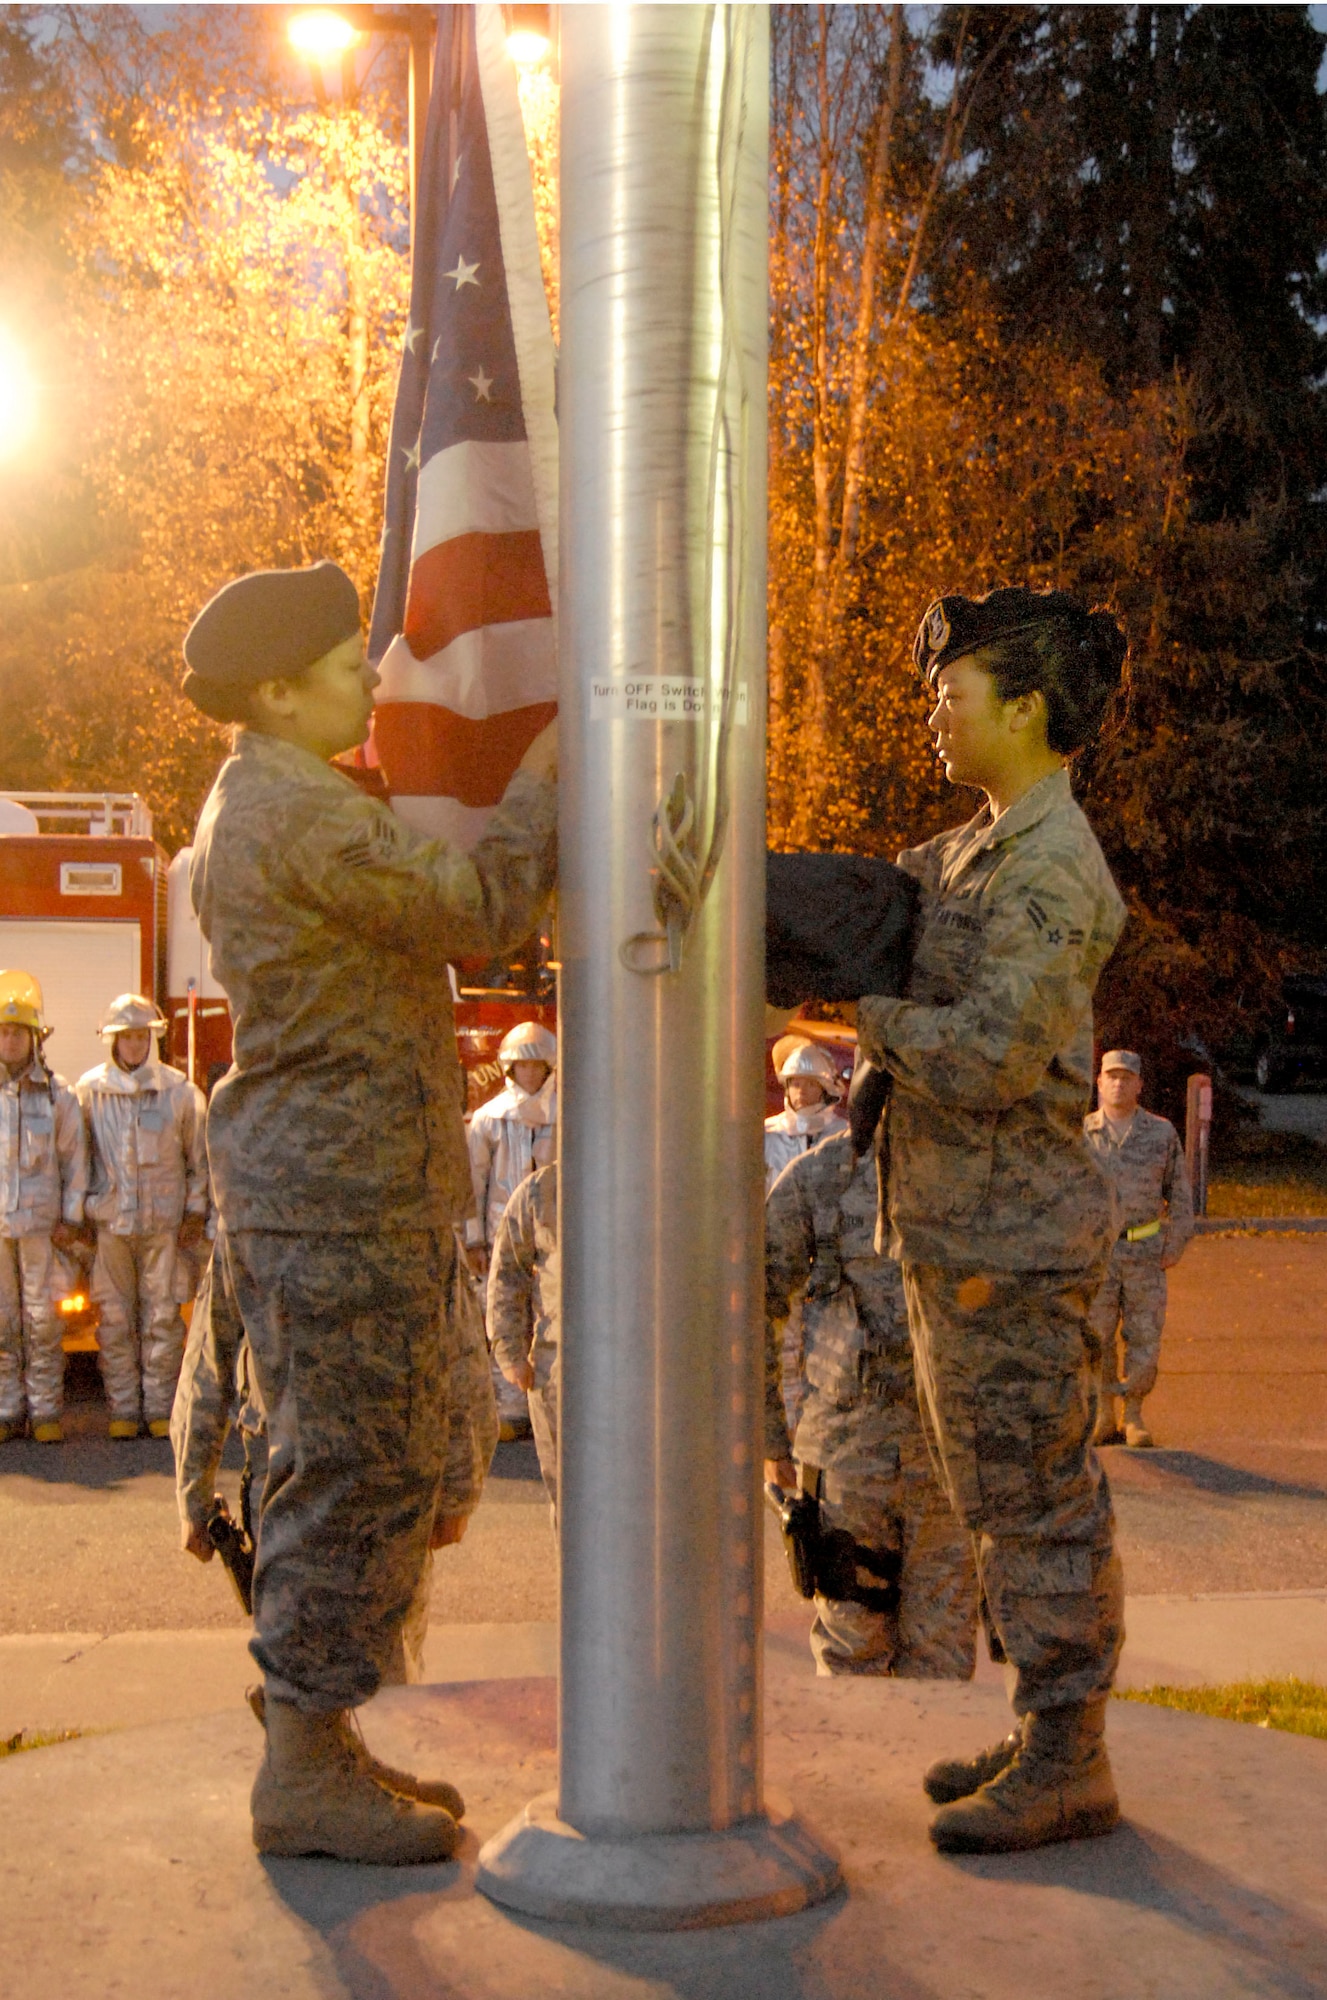 KULIS AIR NATIONAL GUARD BASE, Alaska -- Senior Airman Laurel Foster (left) and Airman 1st Class Alice Chun, both members of the 176th Security Forces Squadron, prepare to raise the U.S. flag as part of an Oct. 3, 2010 ceremony here marking National Fallen Firefighters Memorial Weekend. Fire departments around the country annually observe the ceremony, organized by the National Fallen Firefighters Foundation and the Department of Homeland Security's U.S. Fire Administration. Alaska Air National Guard photo by Master Sgt. Shannon Oleson.